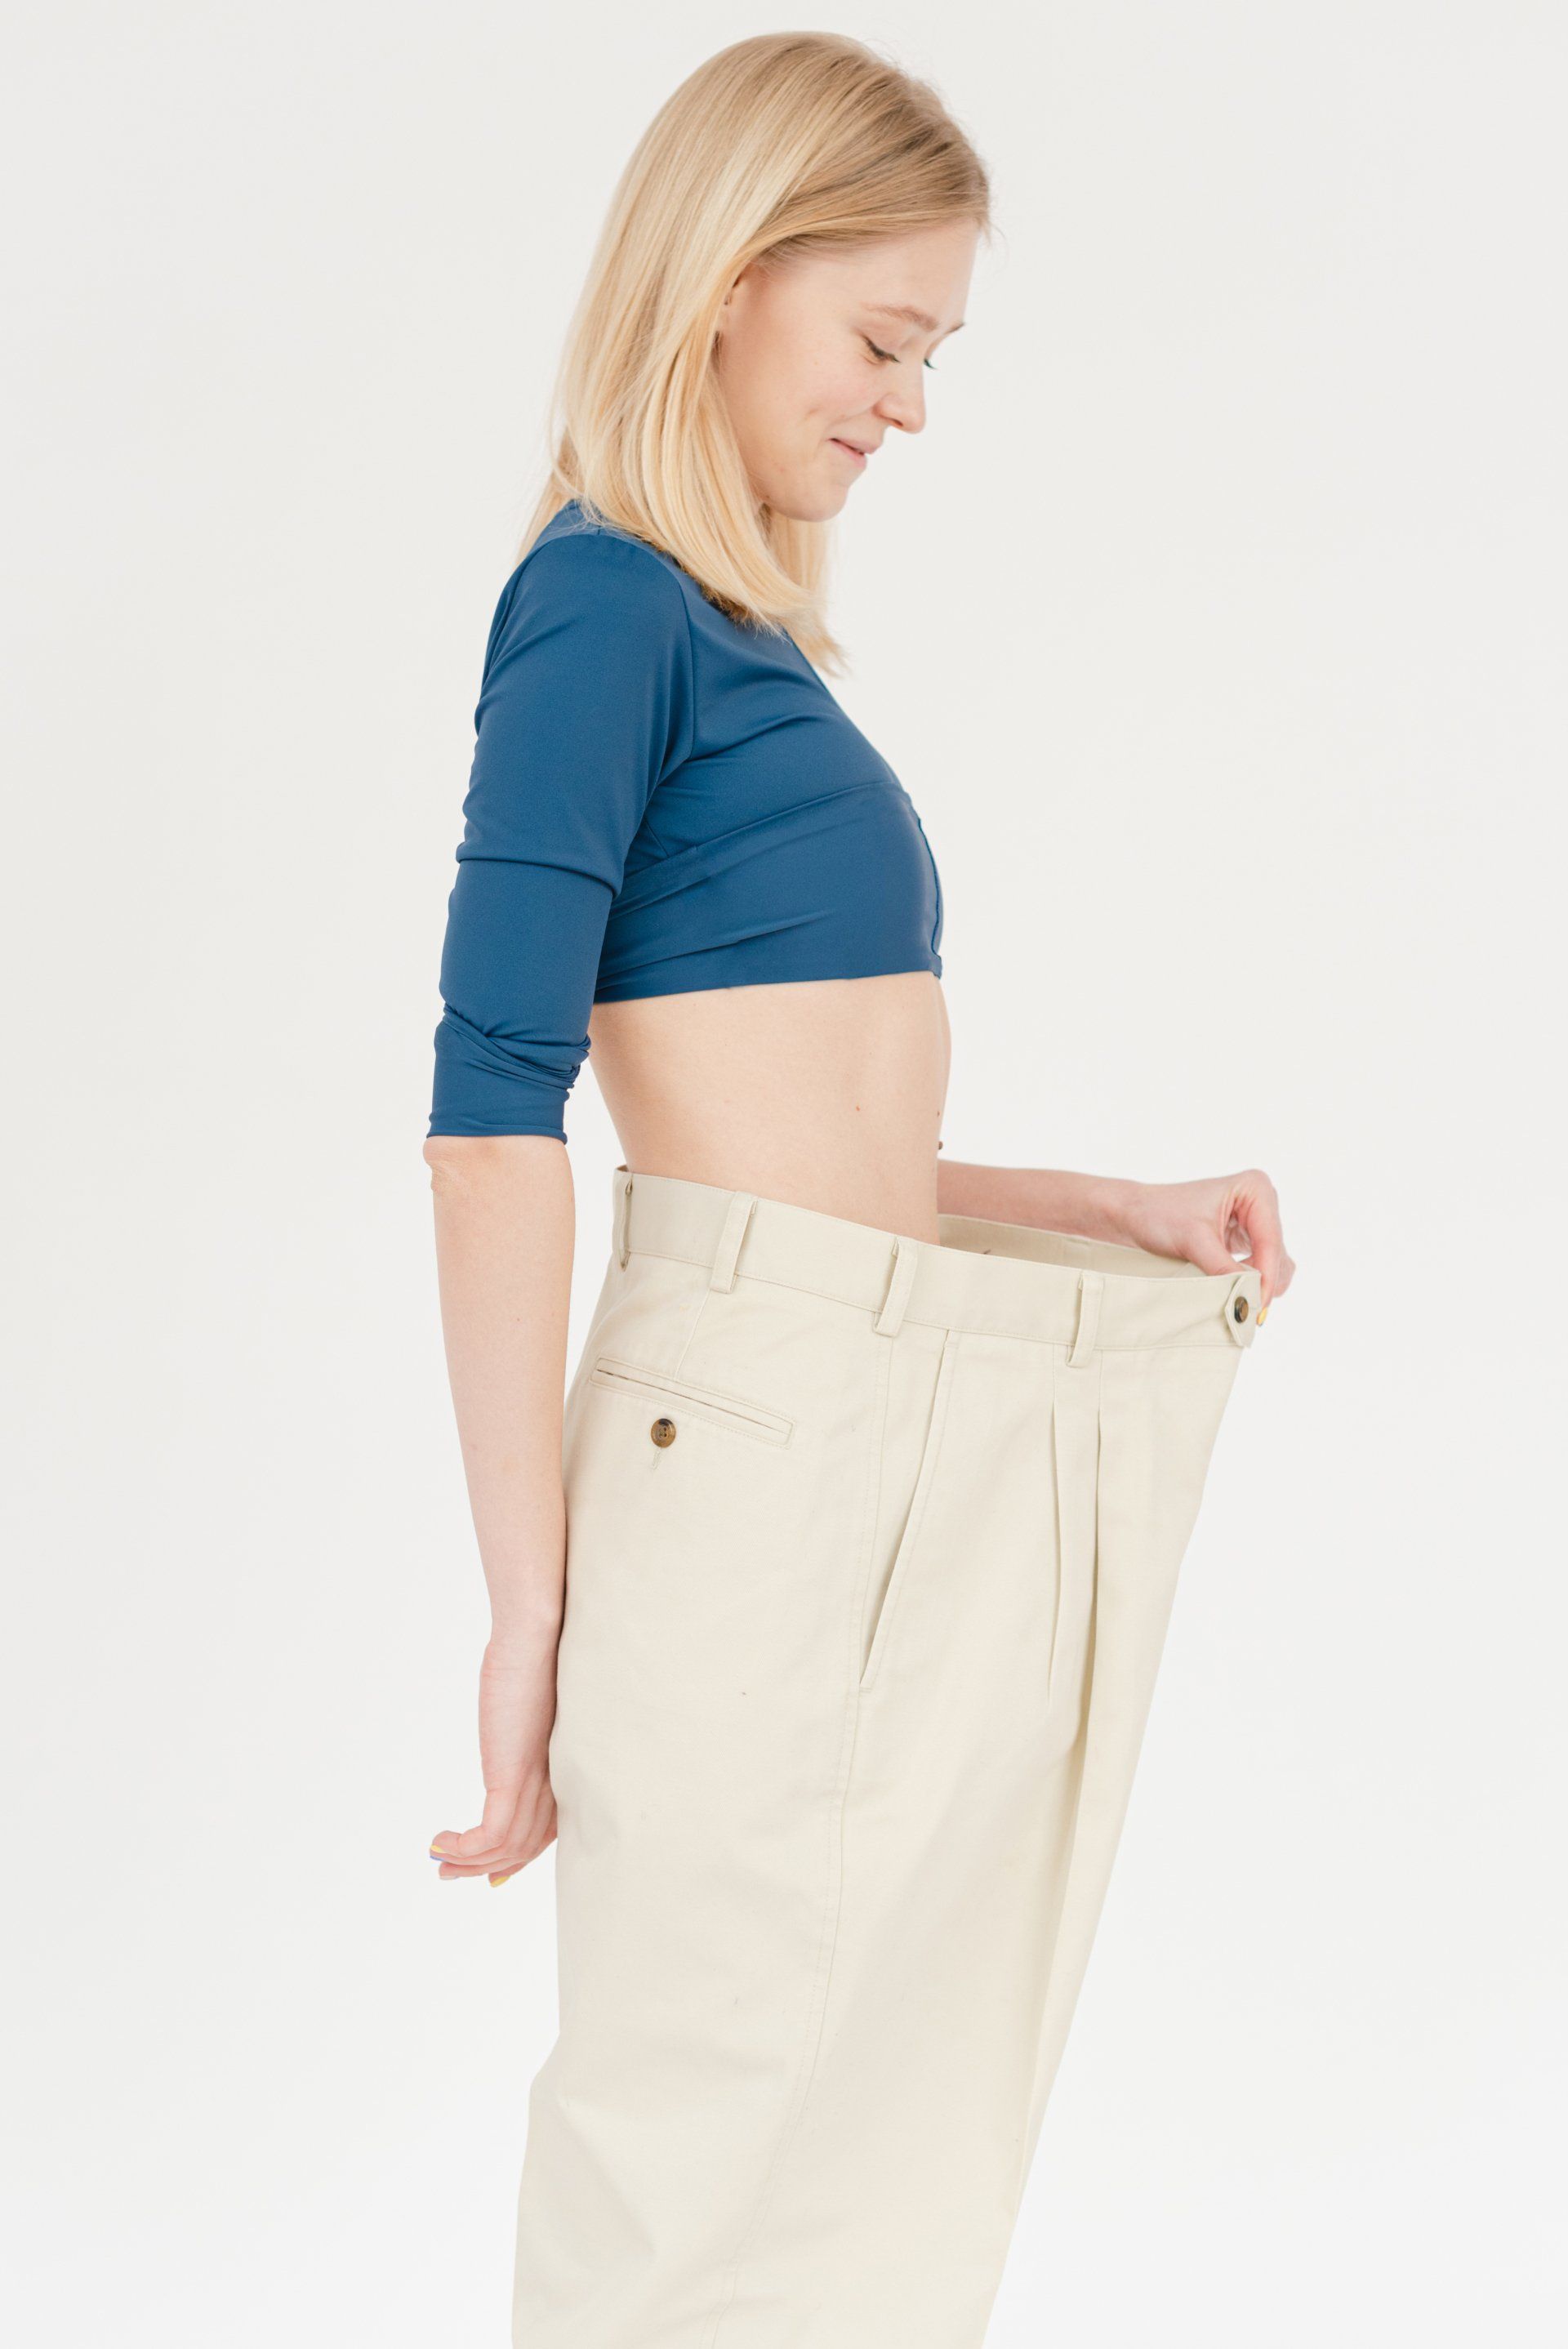 Fit woman wearing an extra large trouser